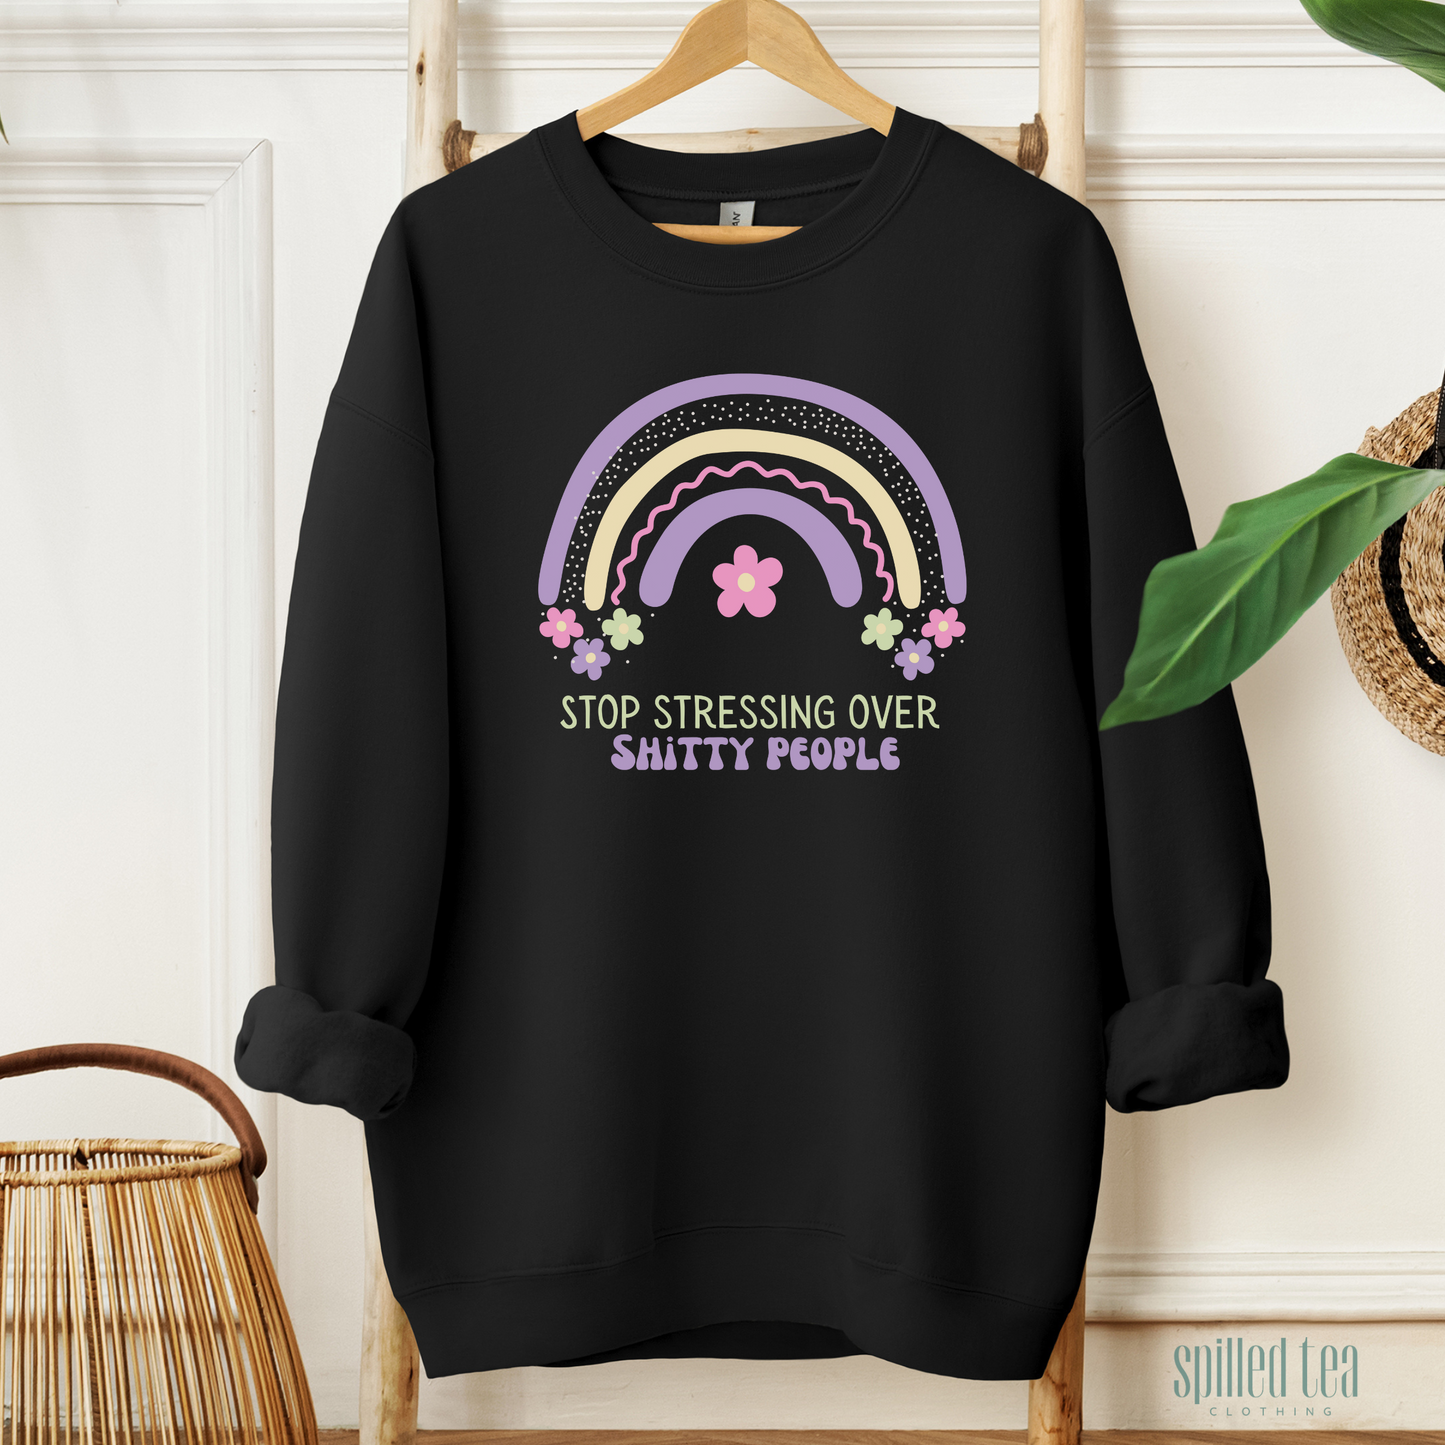 Stop Stressing Over Shitty People Sweatshirt